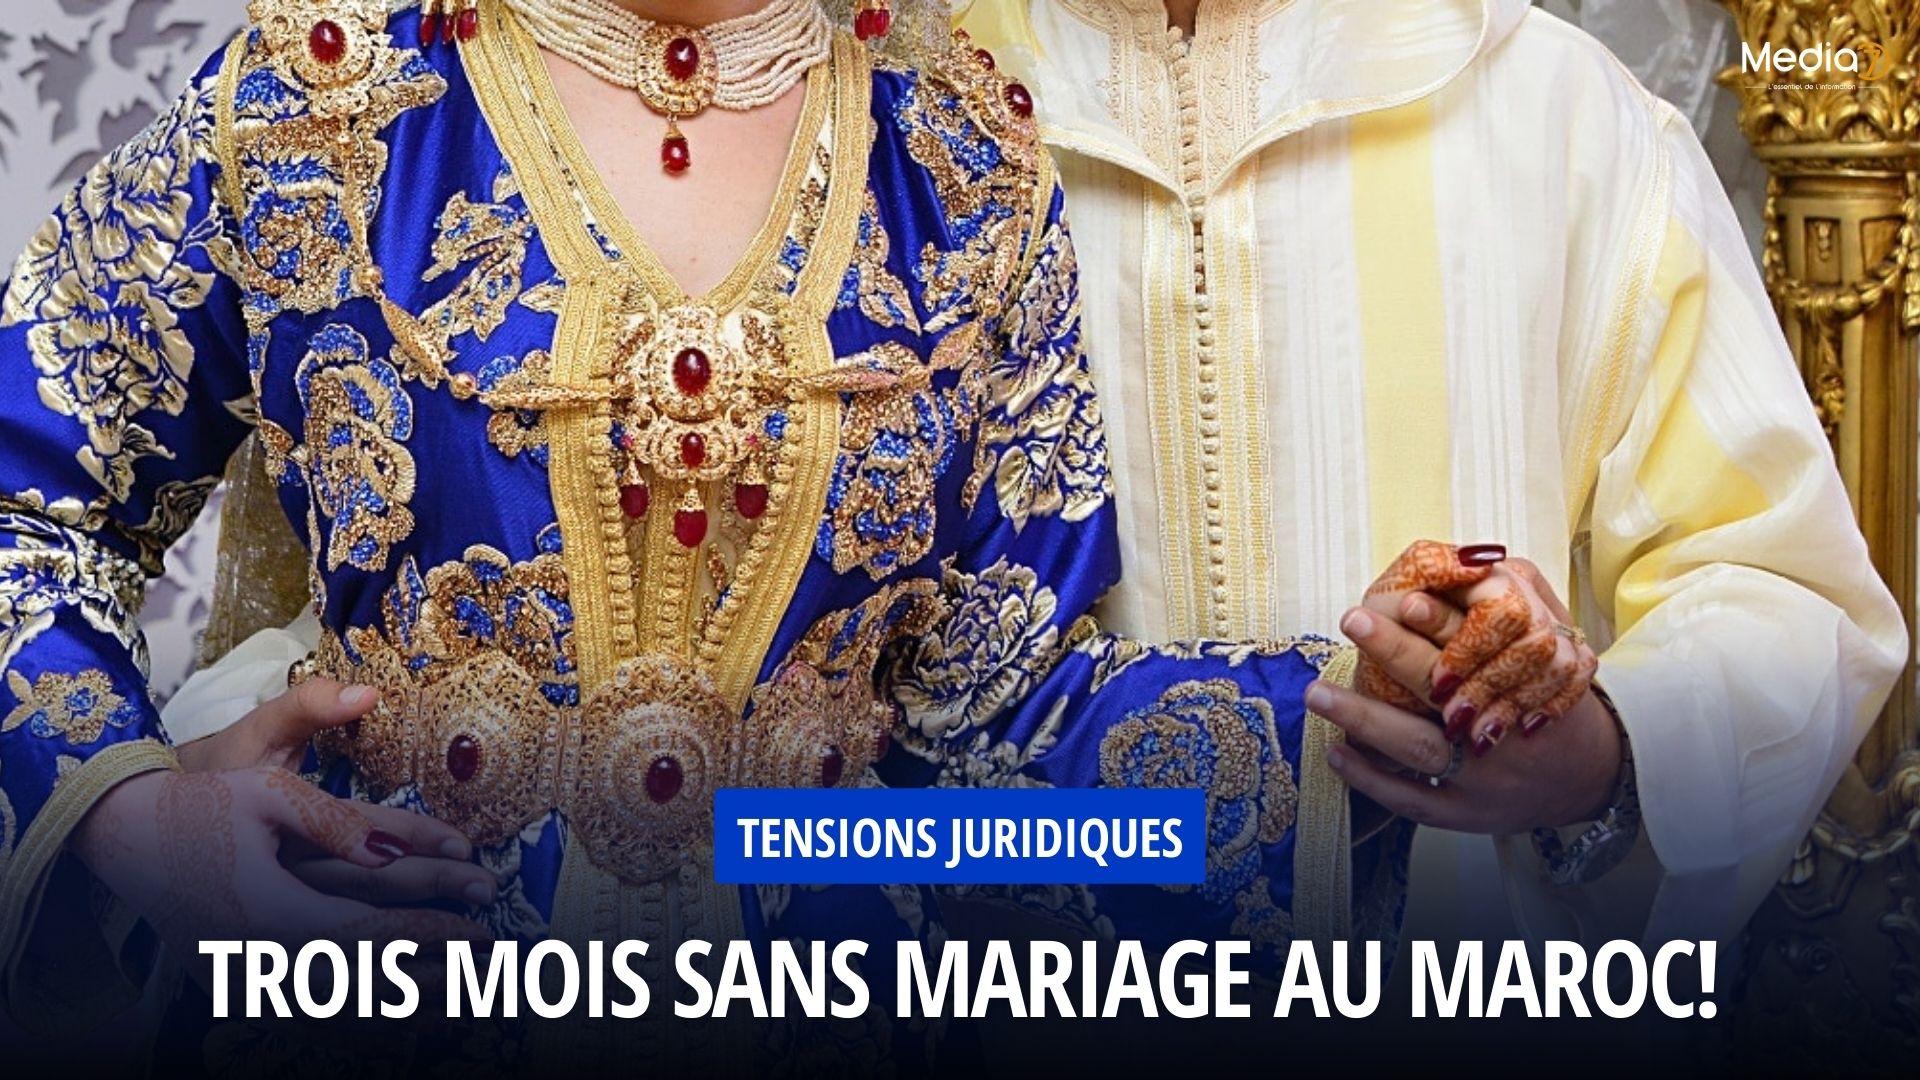 Three months without a wedding in Morocco!